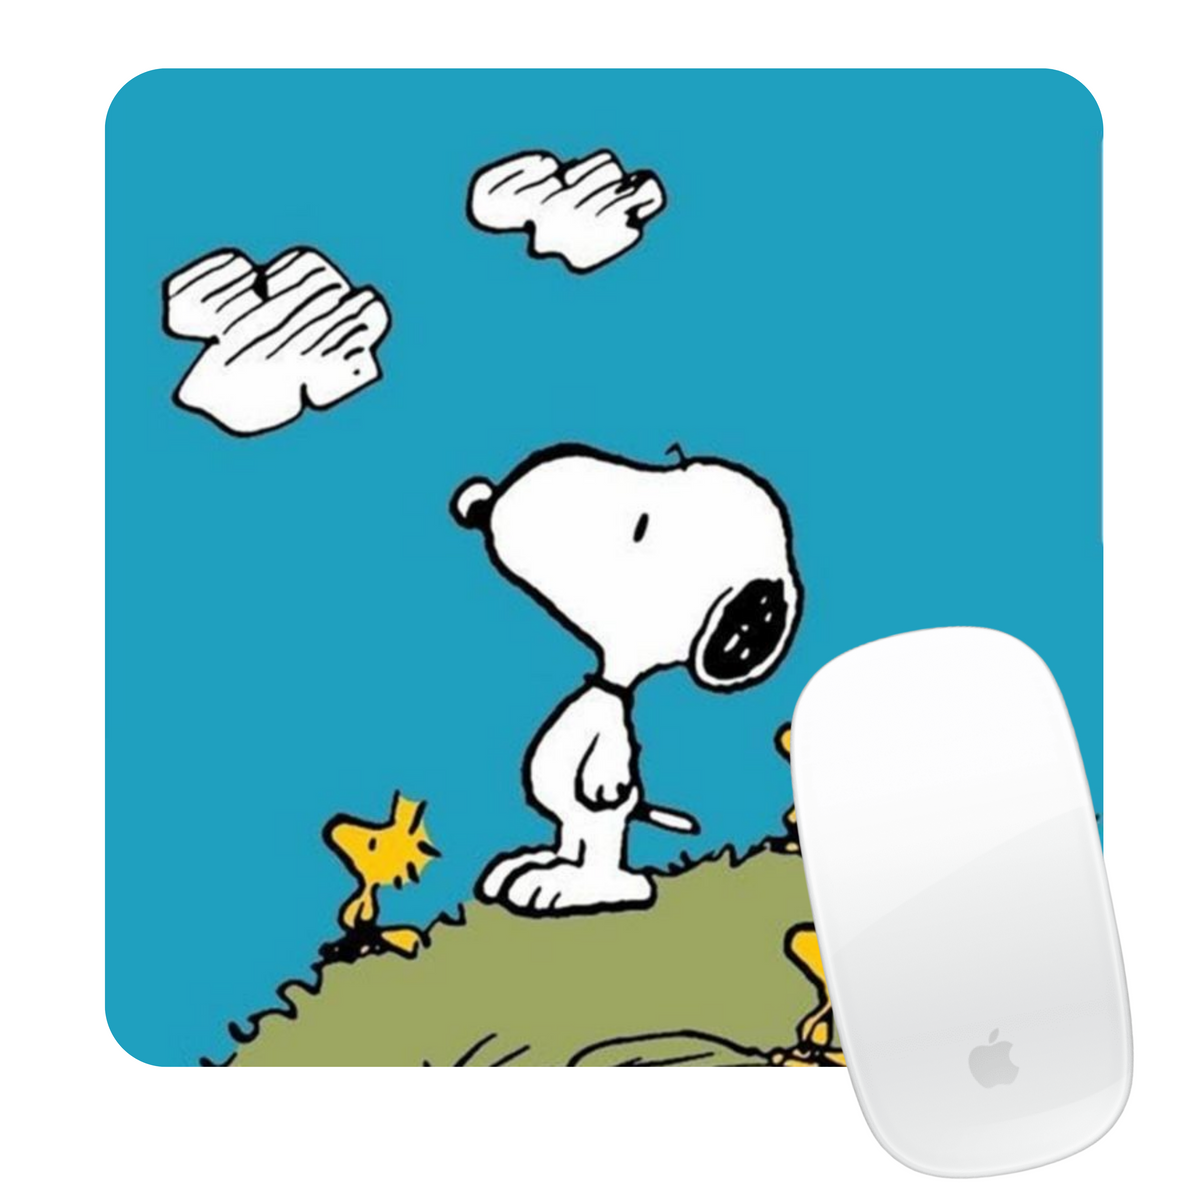 MOUSE PAD SNOOPY SKY